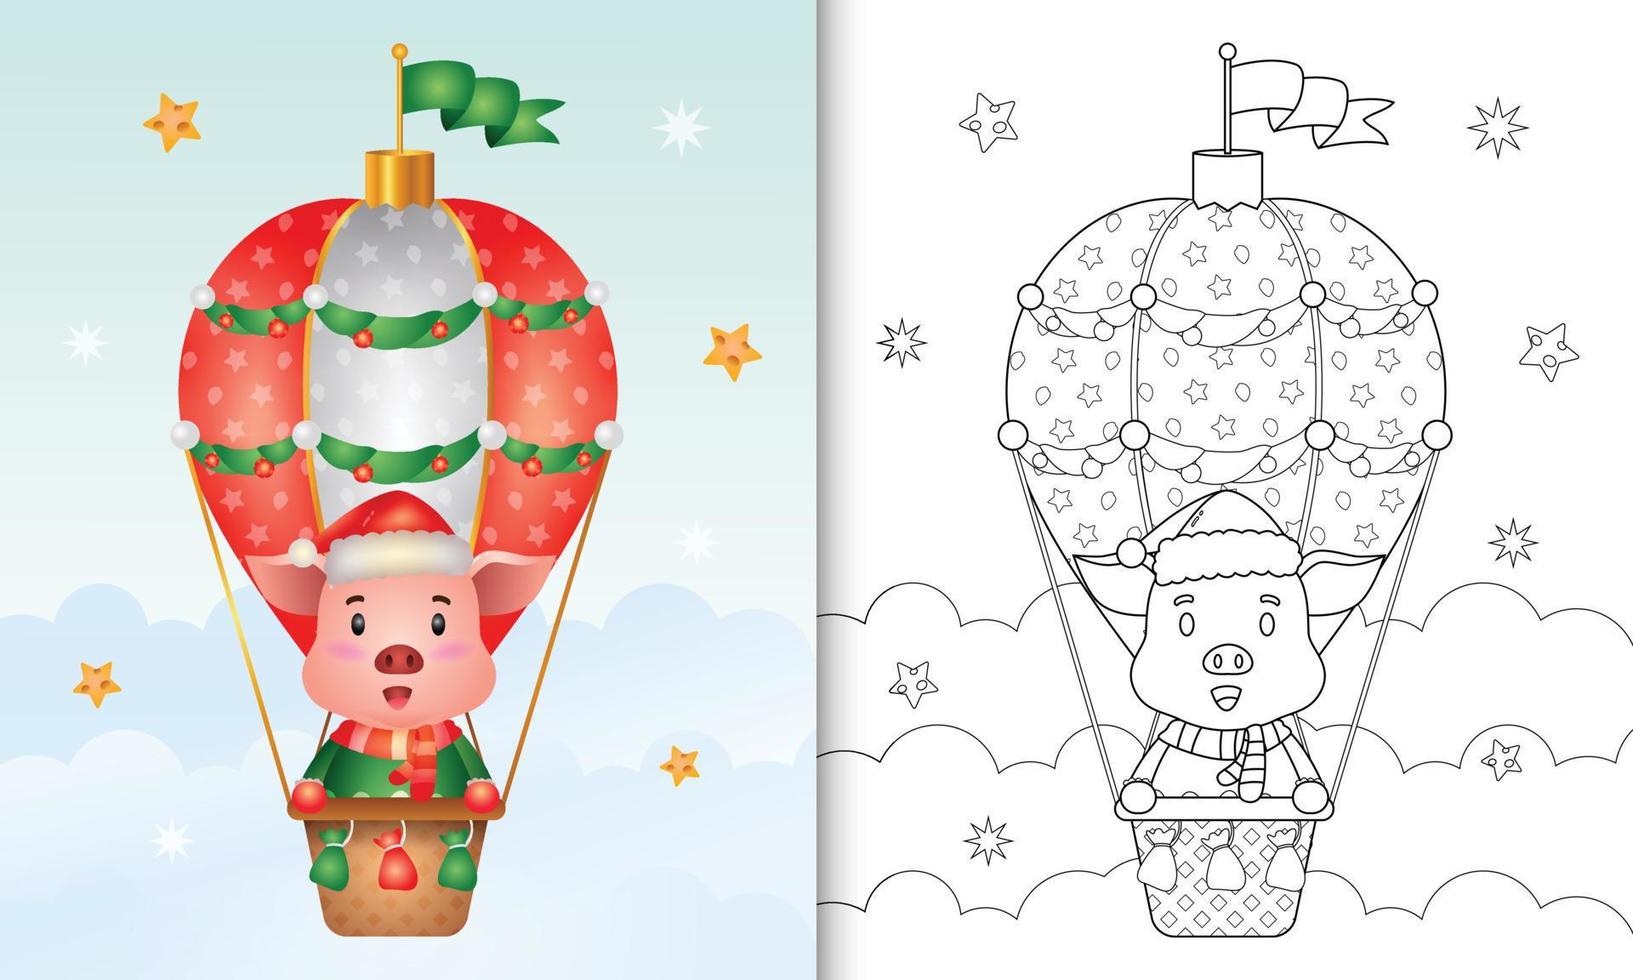 coloring book with a cute pig christmas characters on hot air balloon with a santa hat, jacket and scarf vector